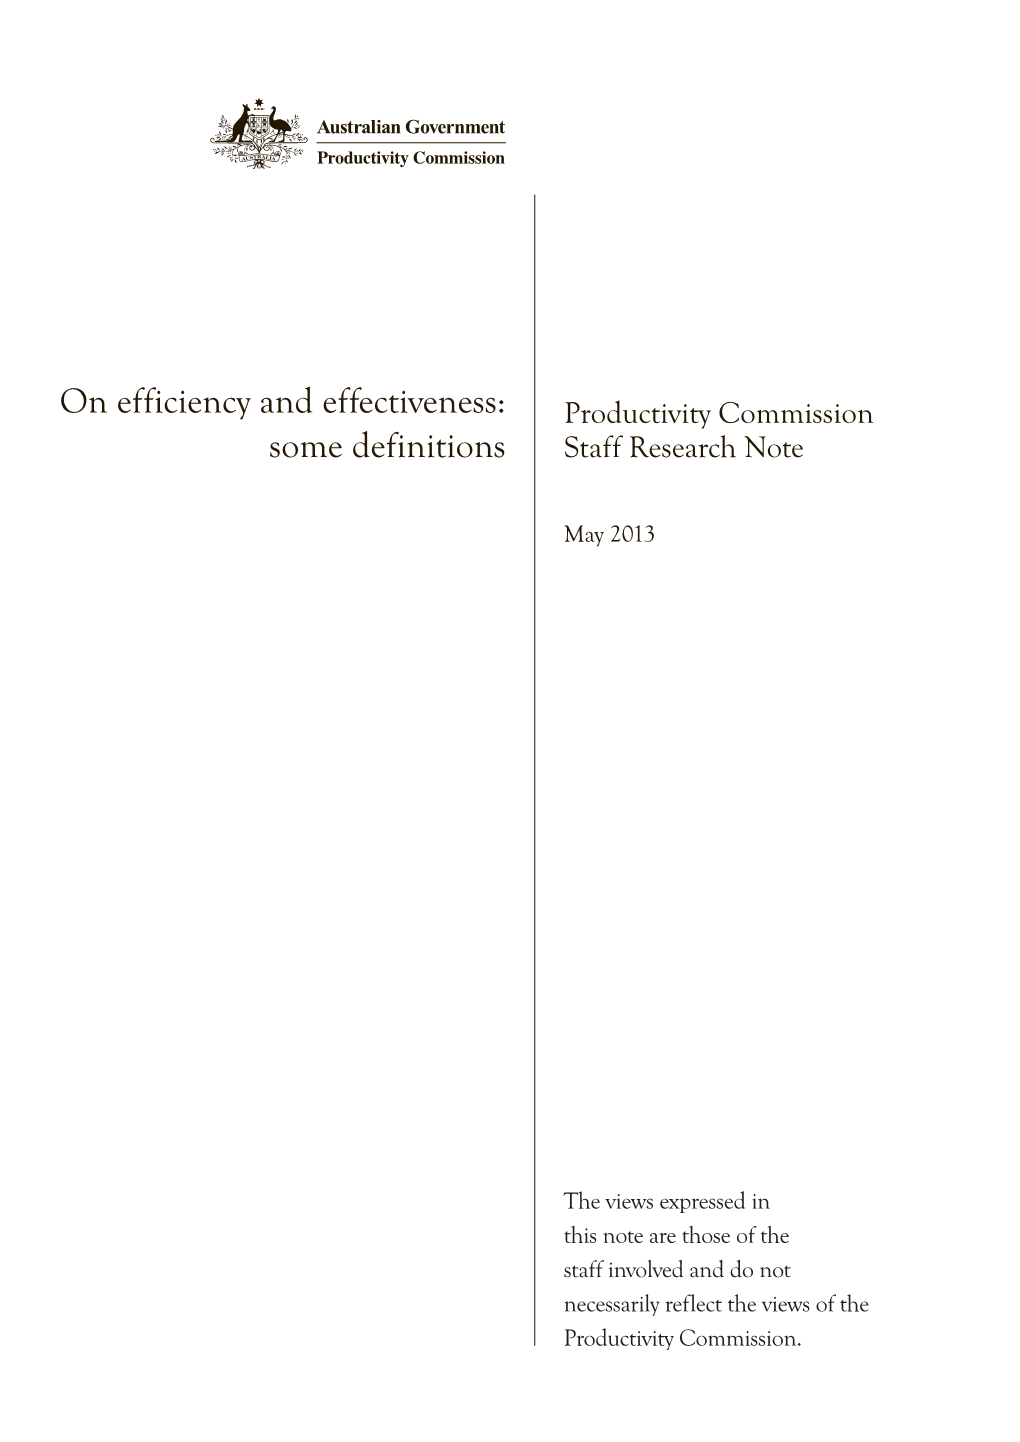 On Efficiency and Effectiveness: Some Definitions, Staff Research Note, Canberra